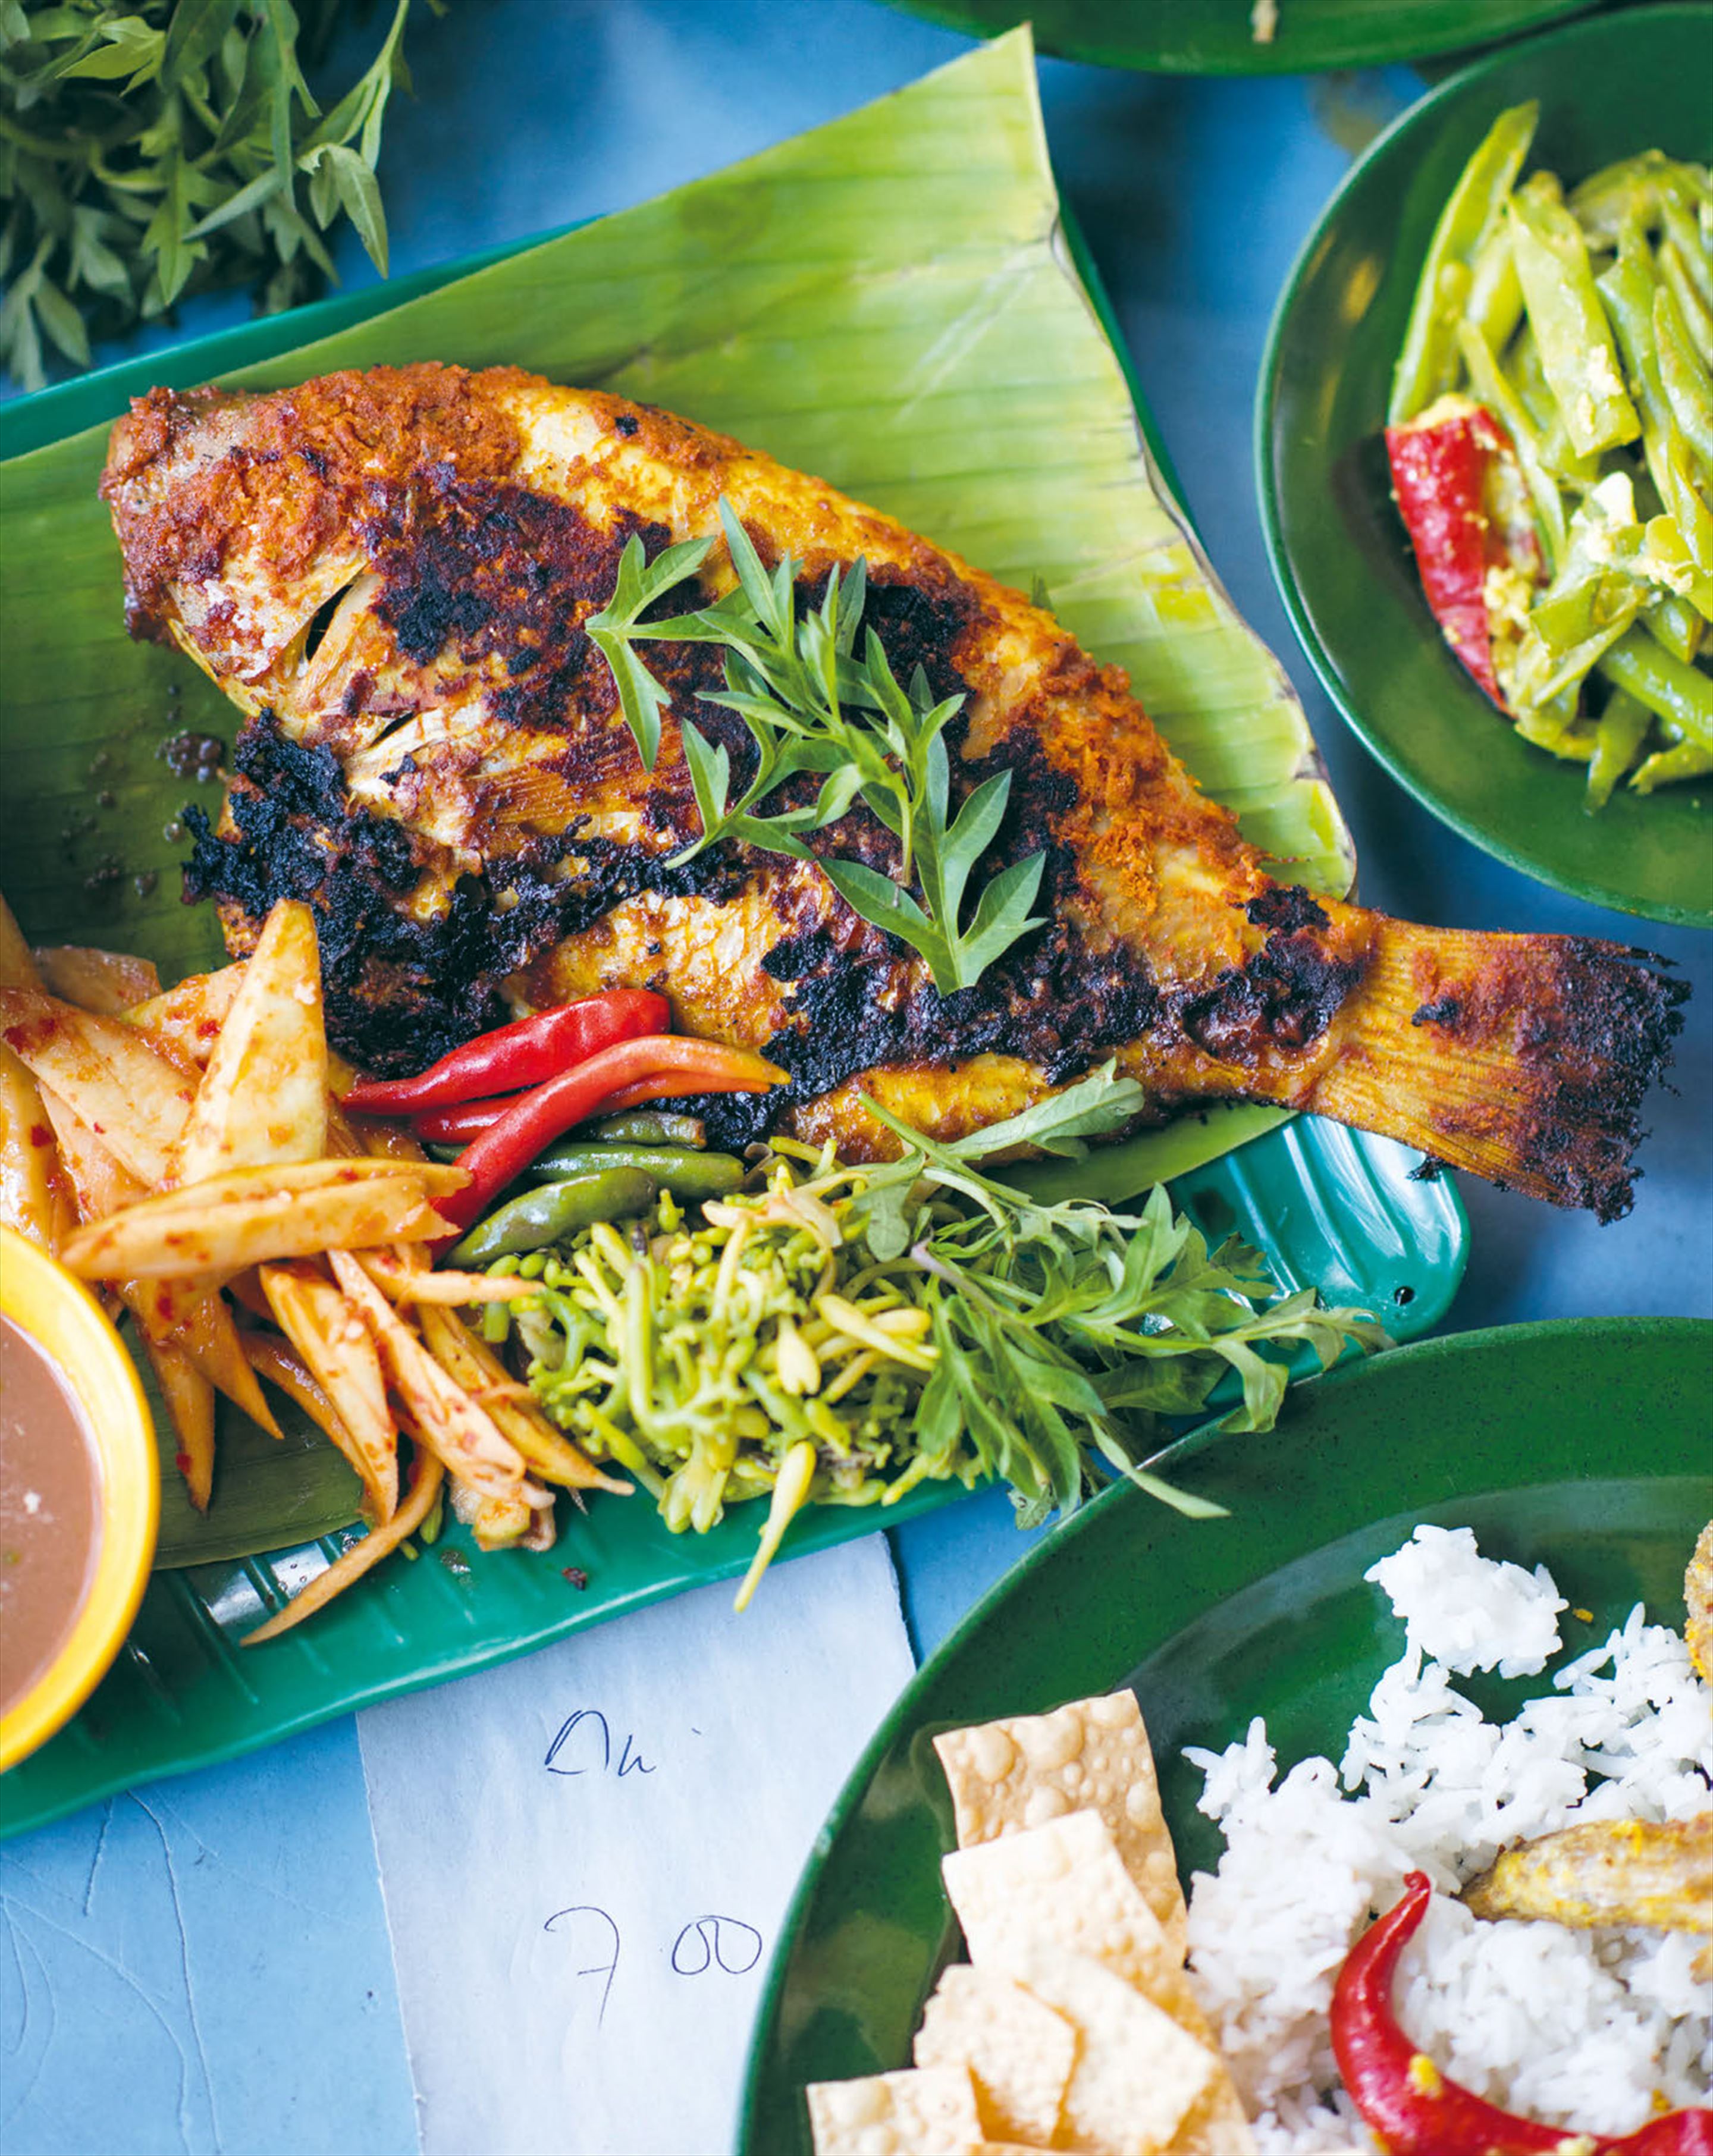 Grilled fish & herbs wrapped in banana leaf